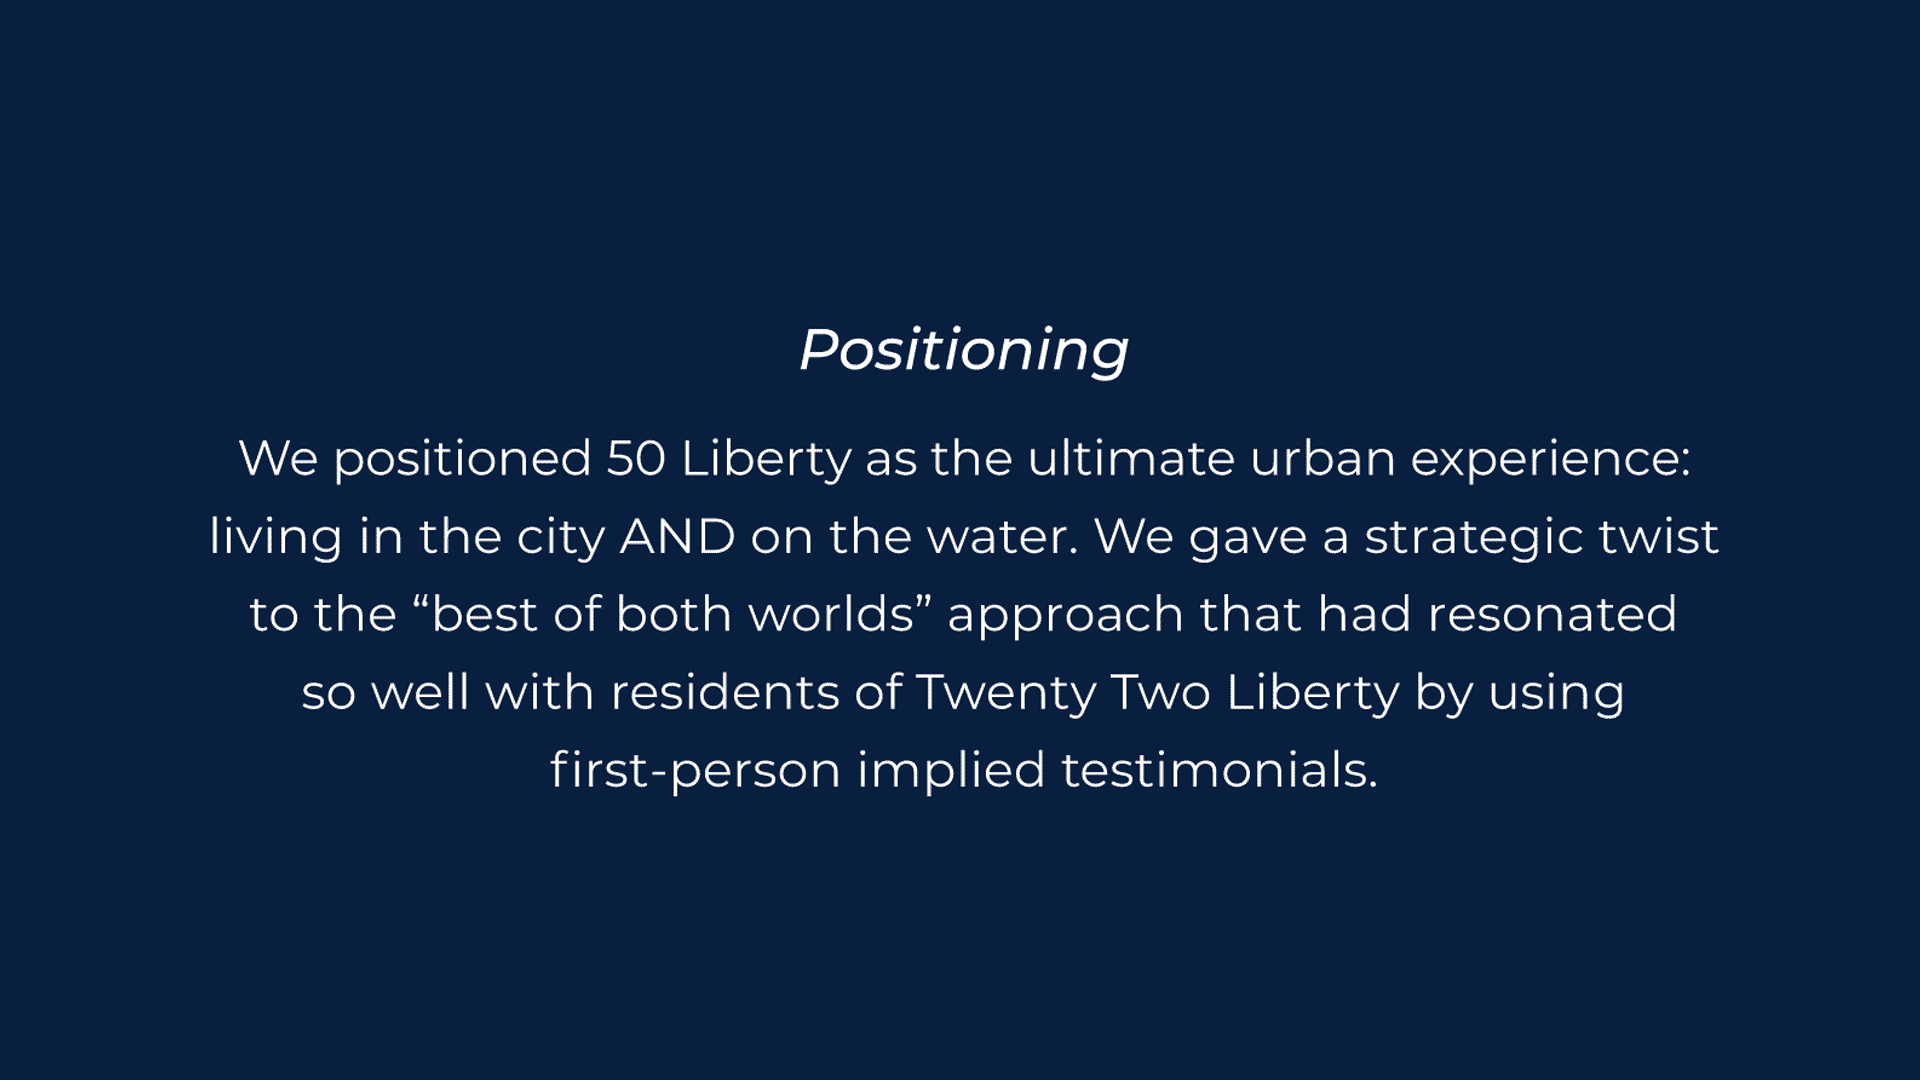 50 Liberty positioning - I love living on the water